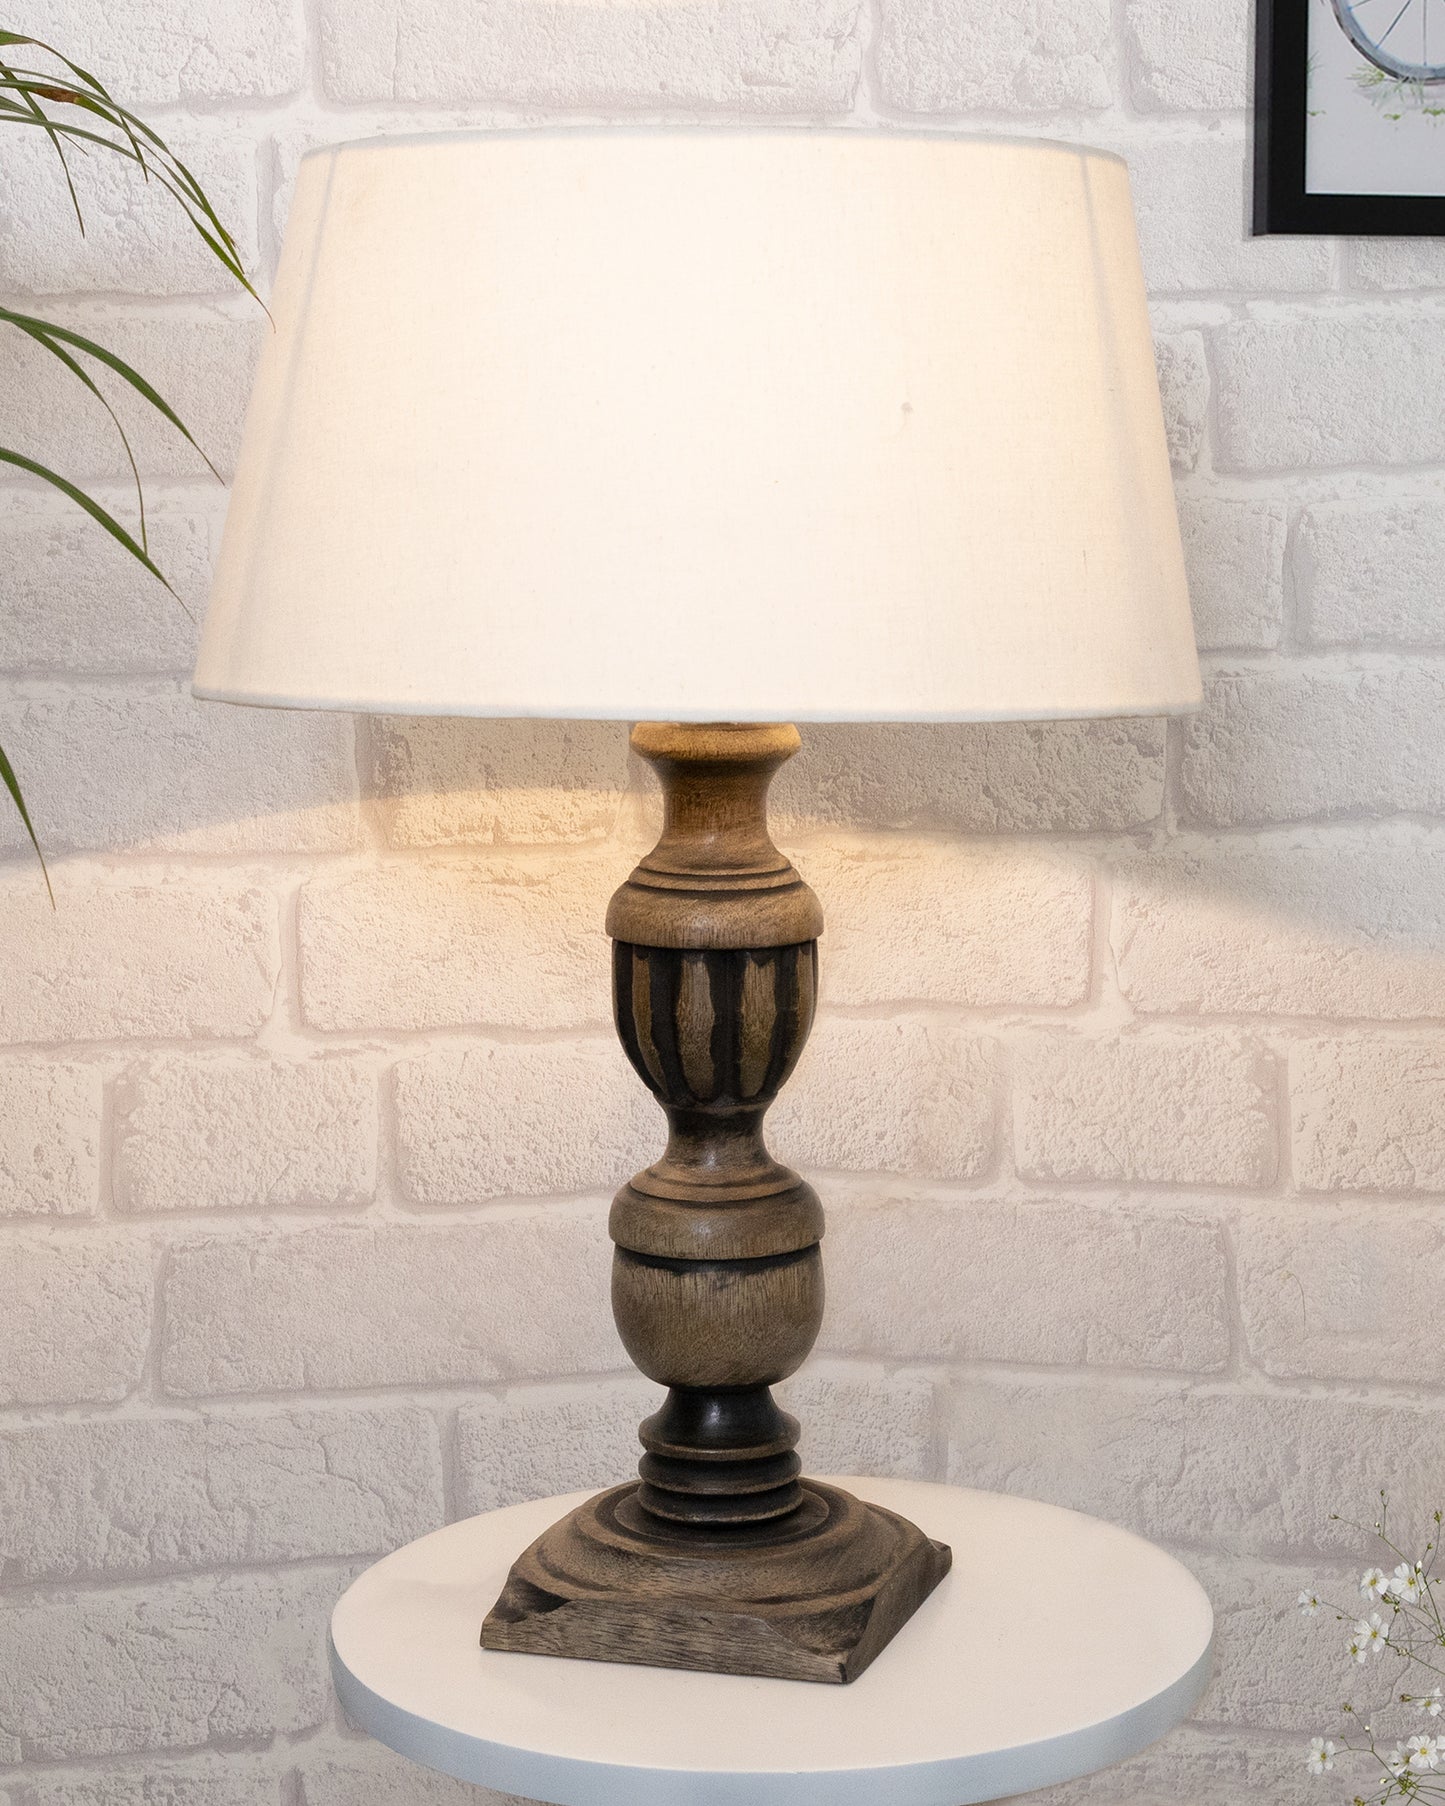 Rustic Antique Black French Trophy Carved Table lamp with Empire shade